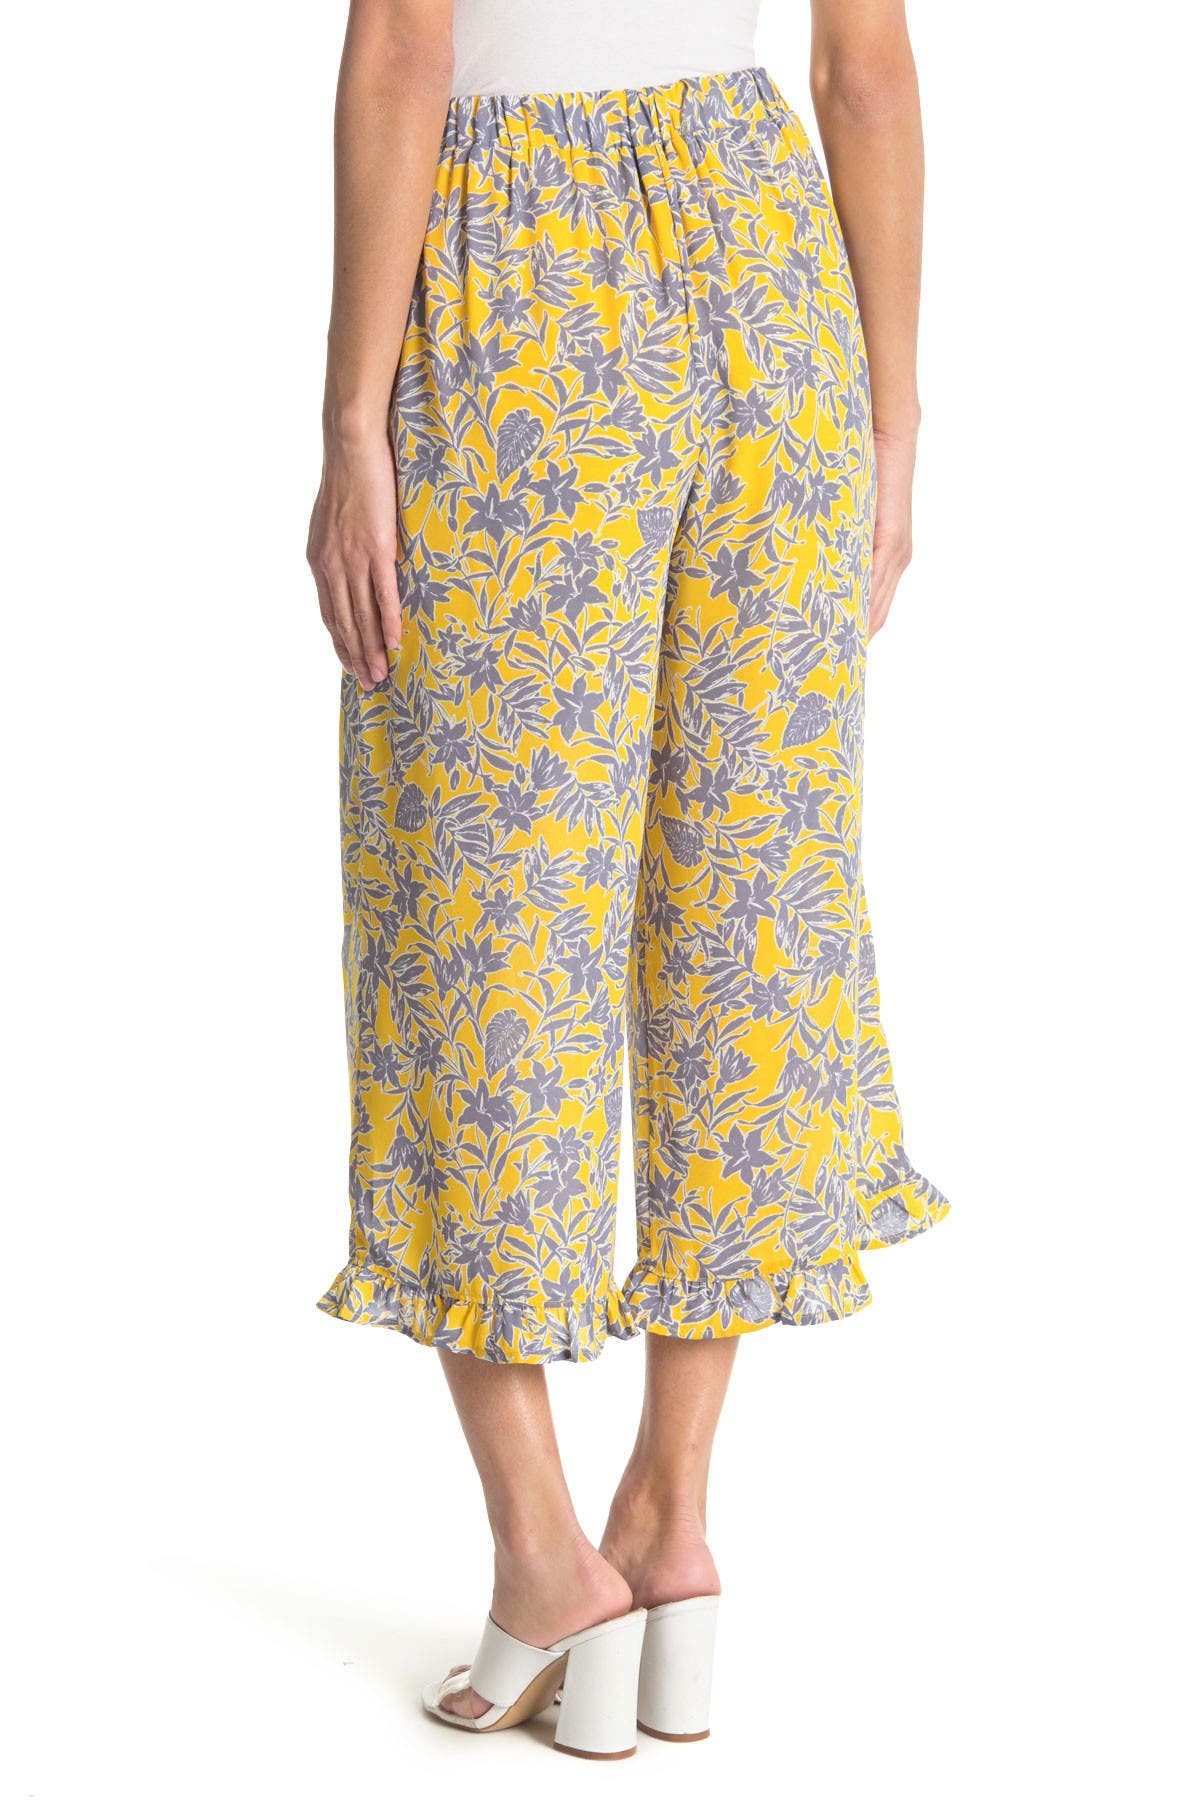 19 Cooper Woven Floral Midi Skirt In Lt Blue/yellow